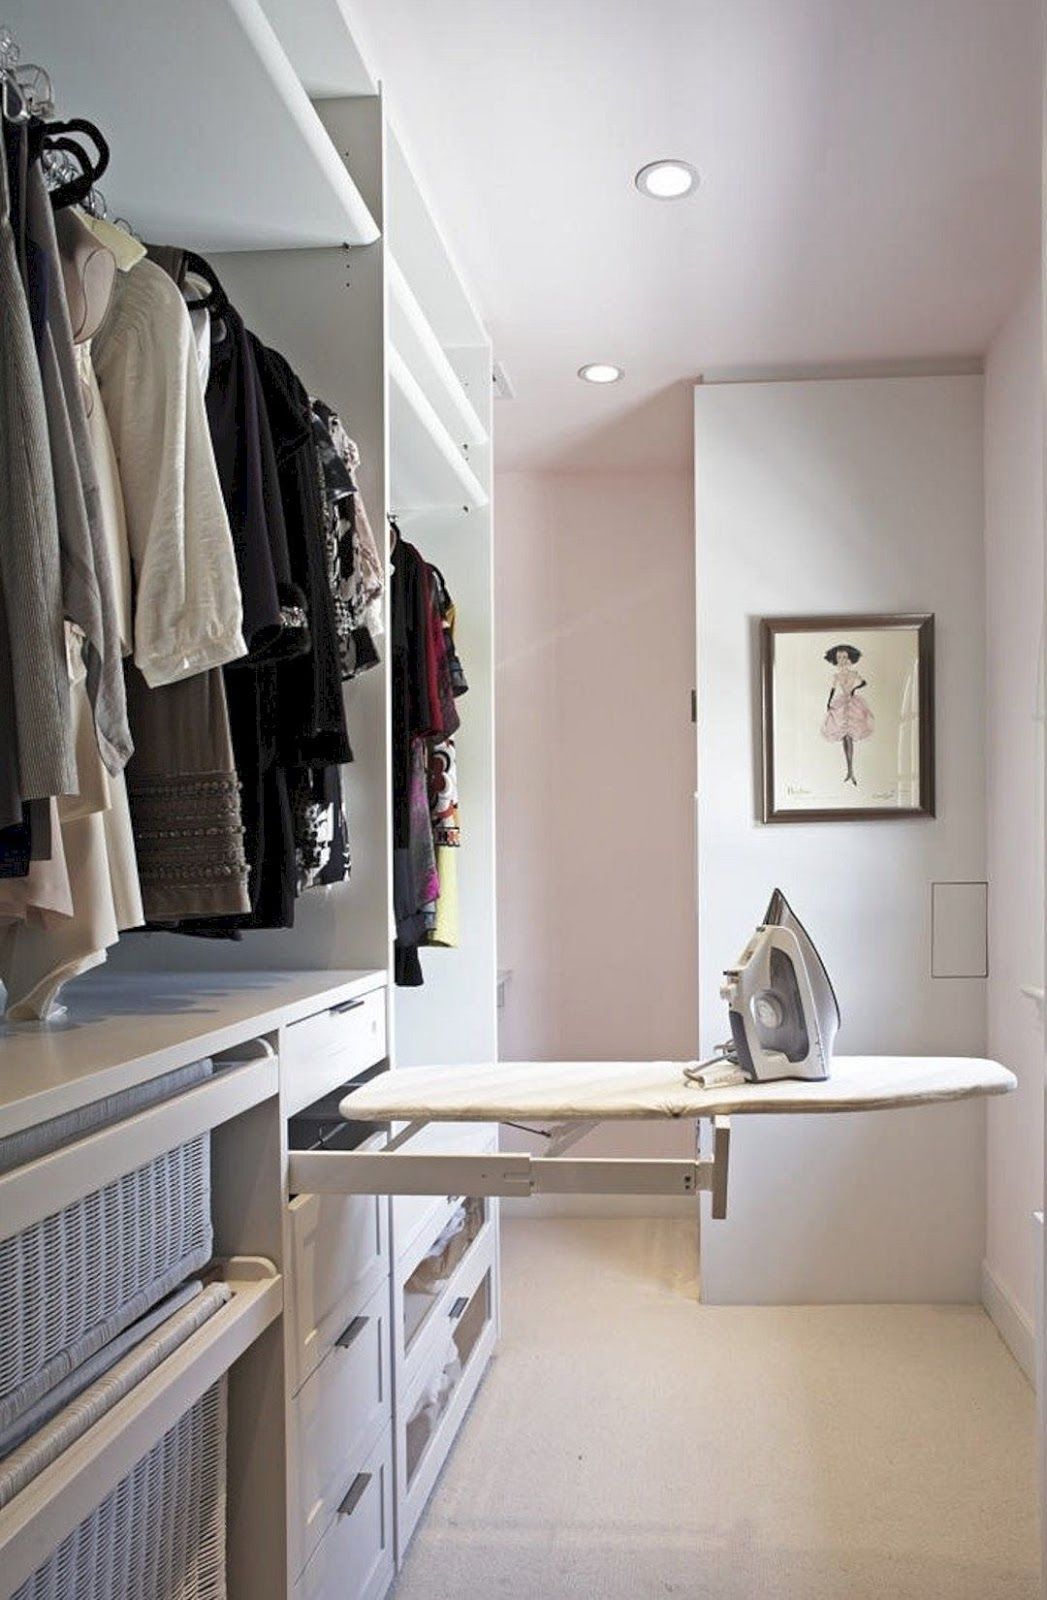 30+ Interesting Ideas For Organizing Your Closet